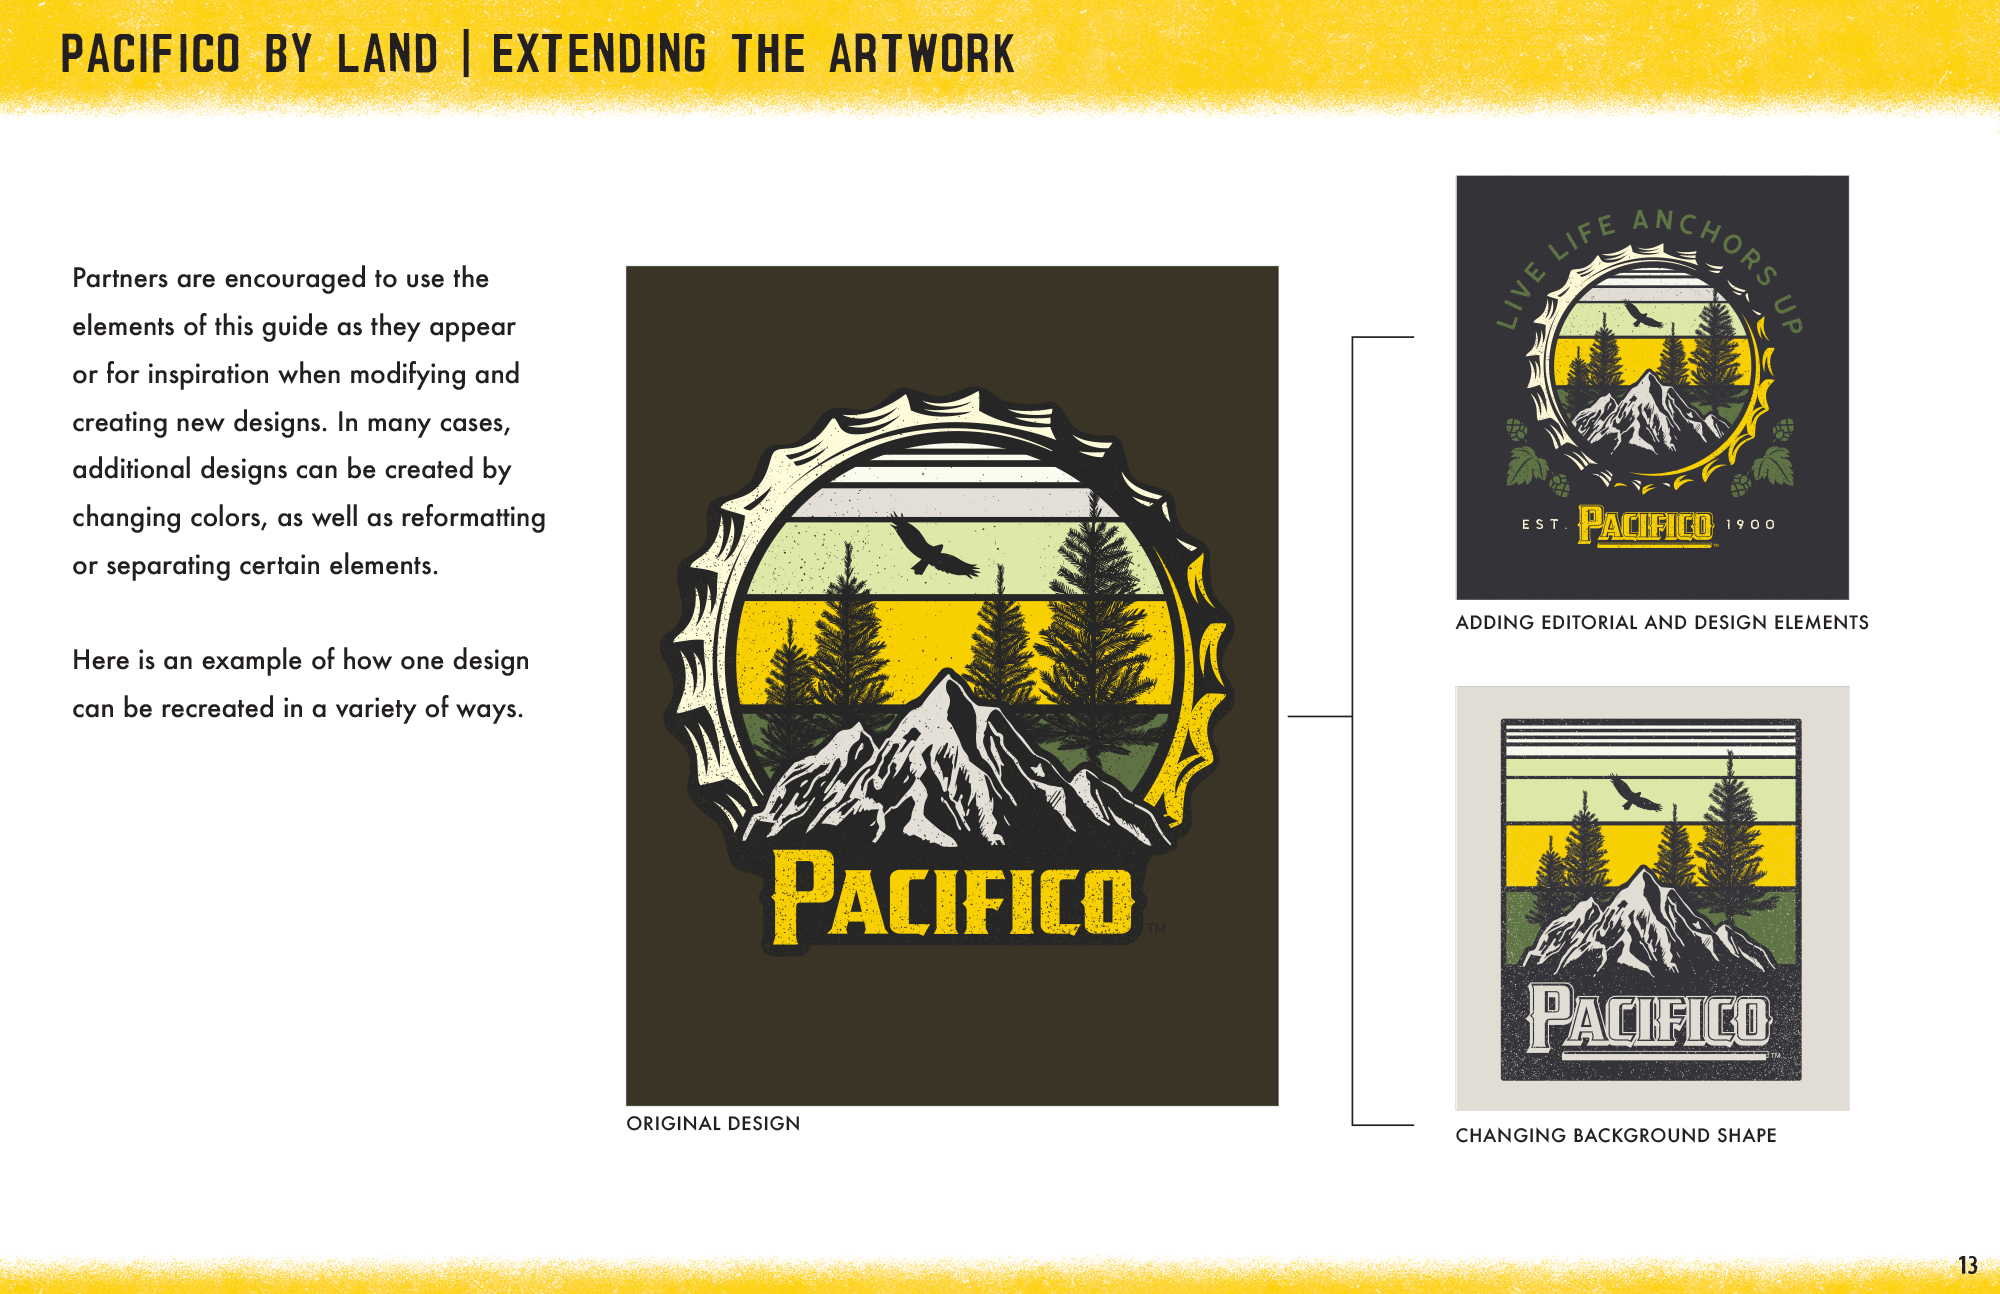 Pacifico Brand Designs and Product Vision Tutorial